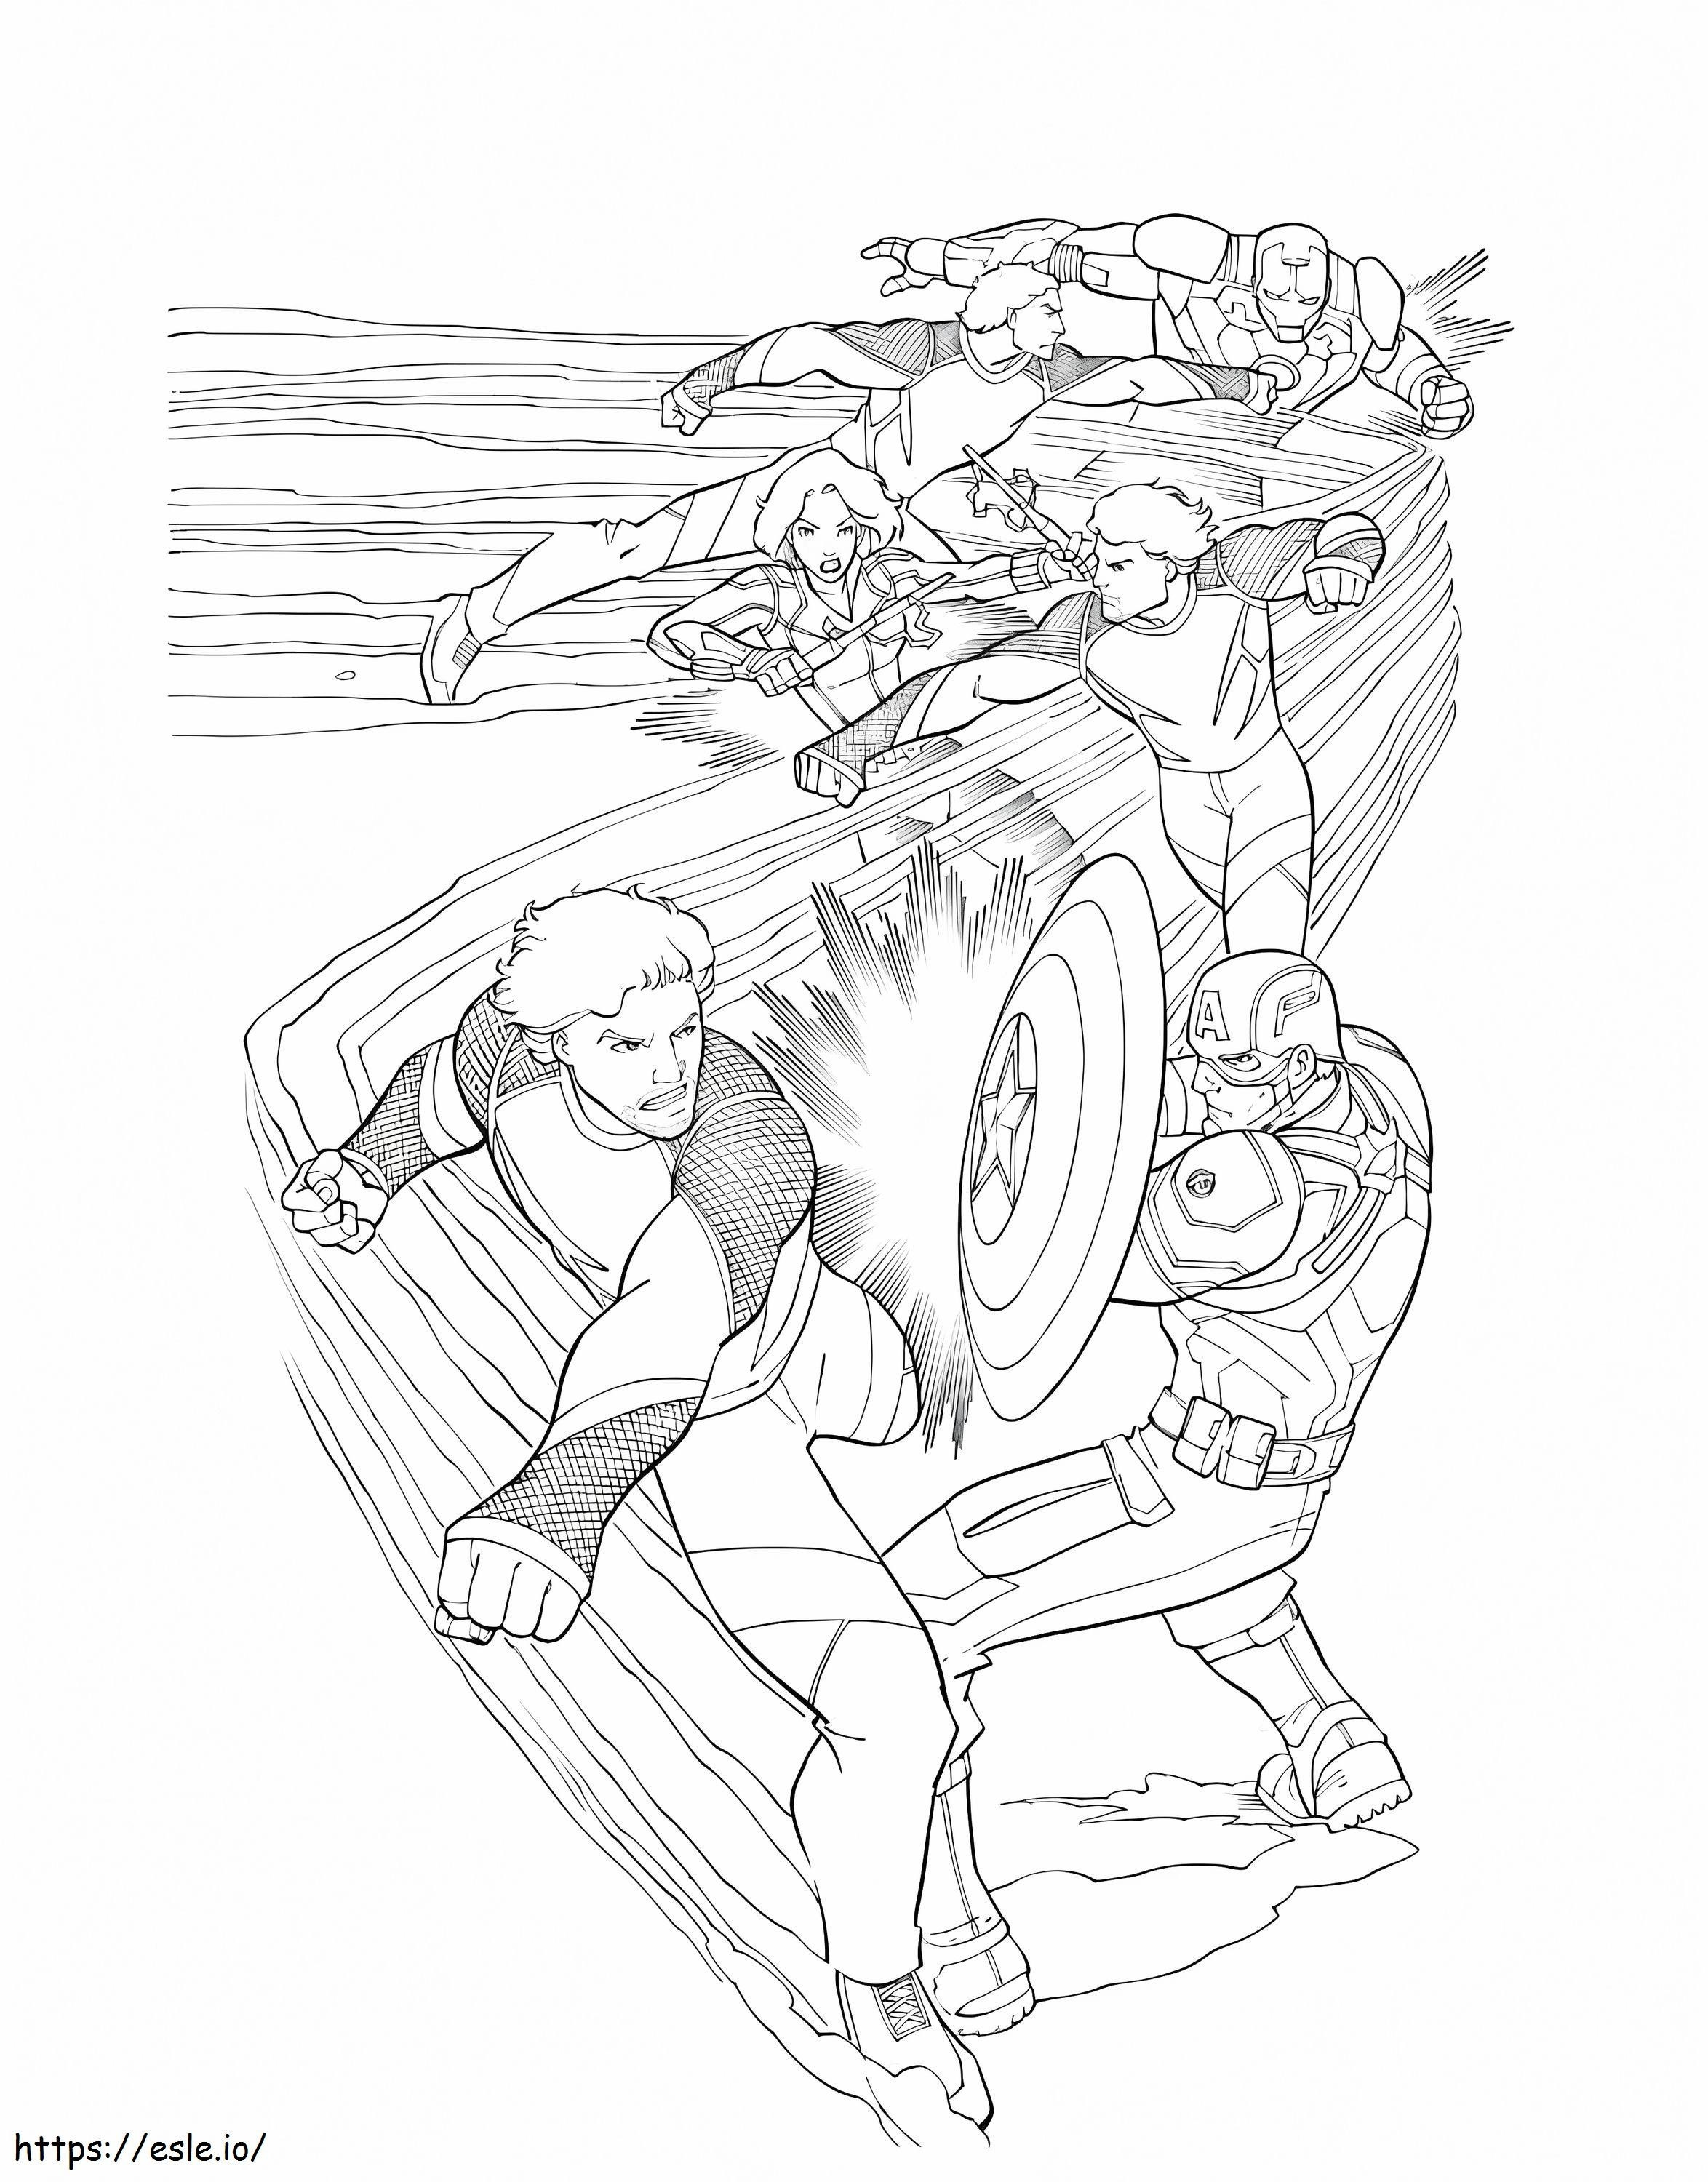 Avengers 2 coloring page